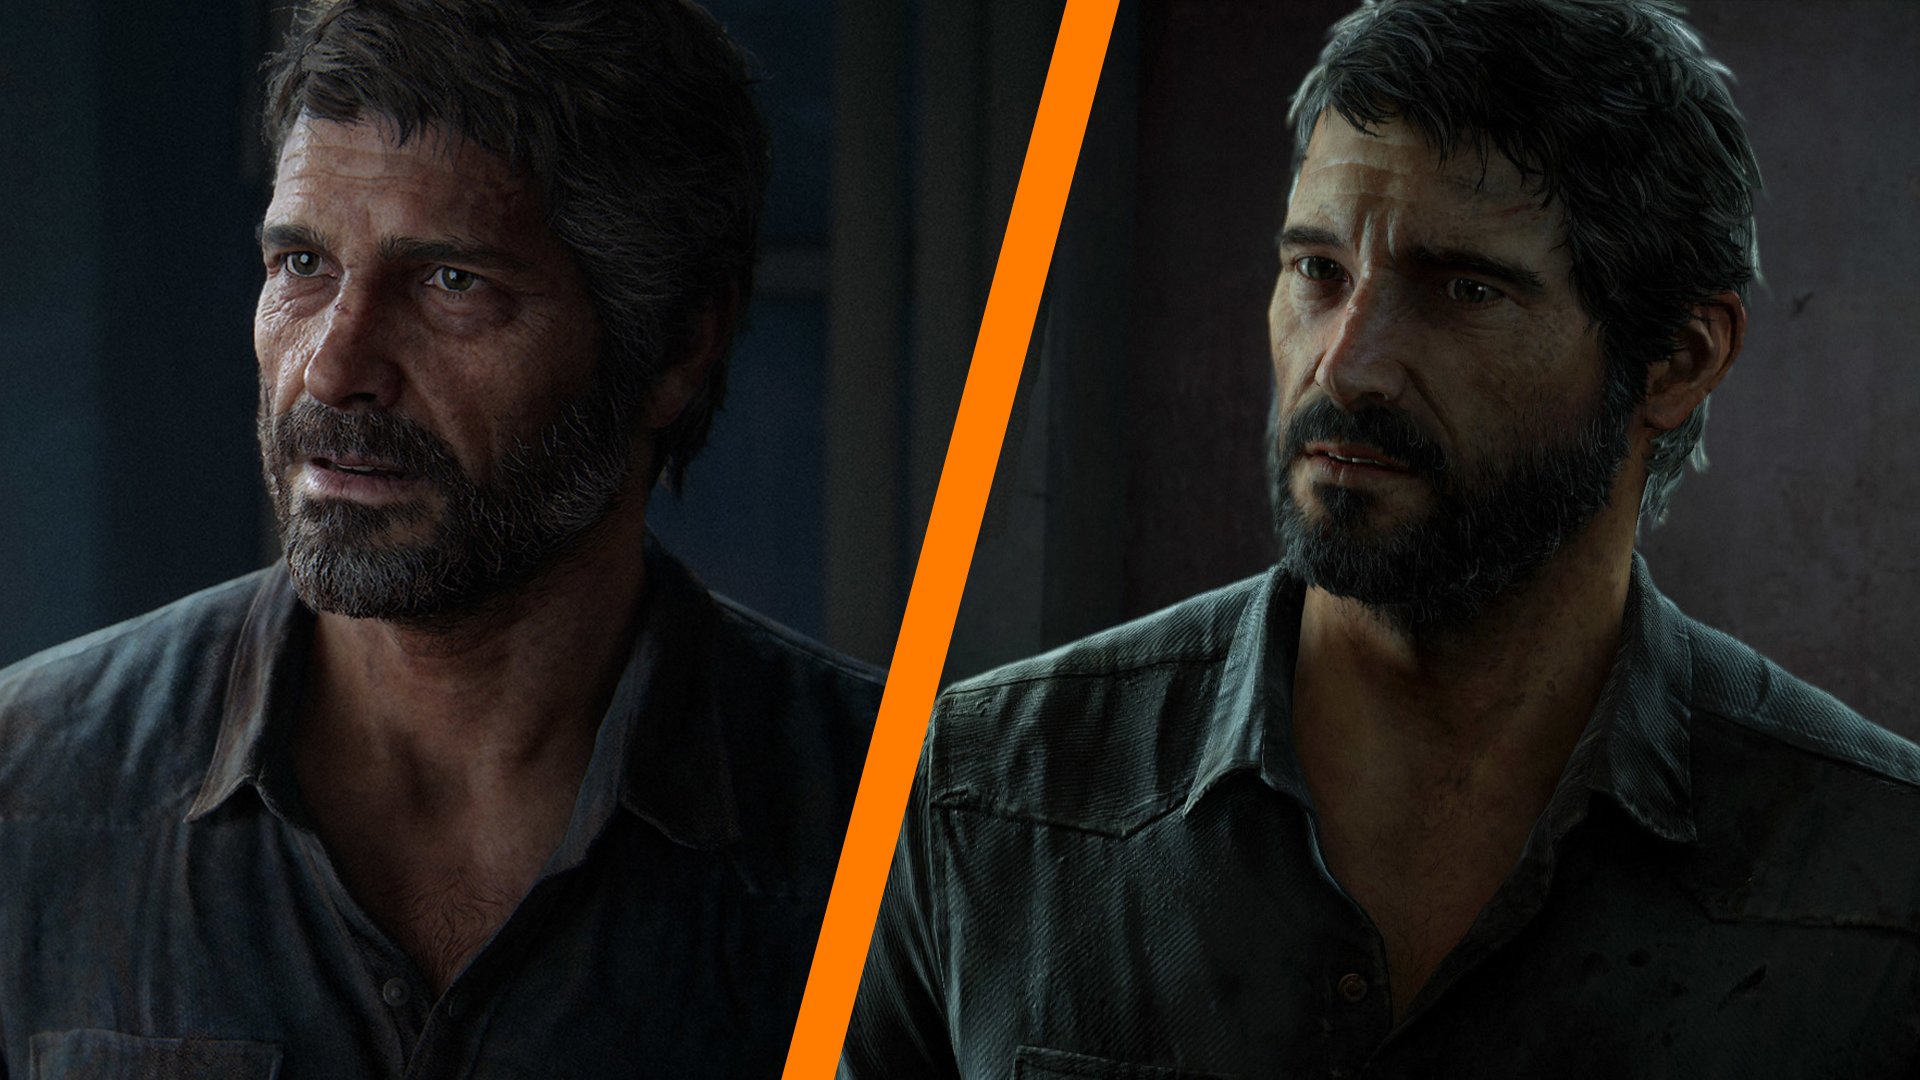 Gallery: Here's how The Last of Us remake looks compared to PS4